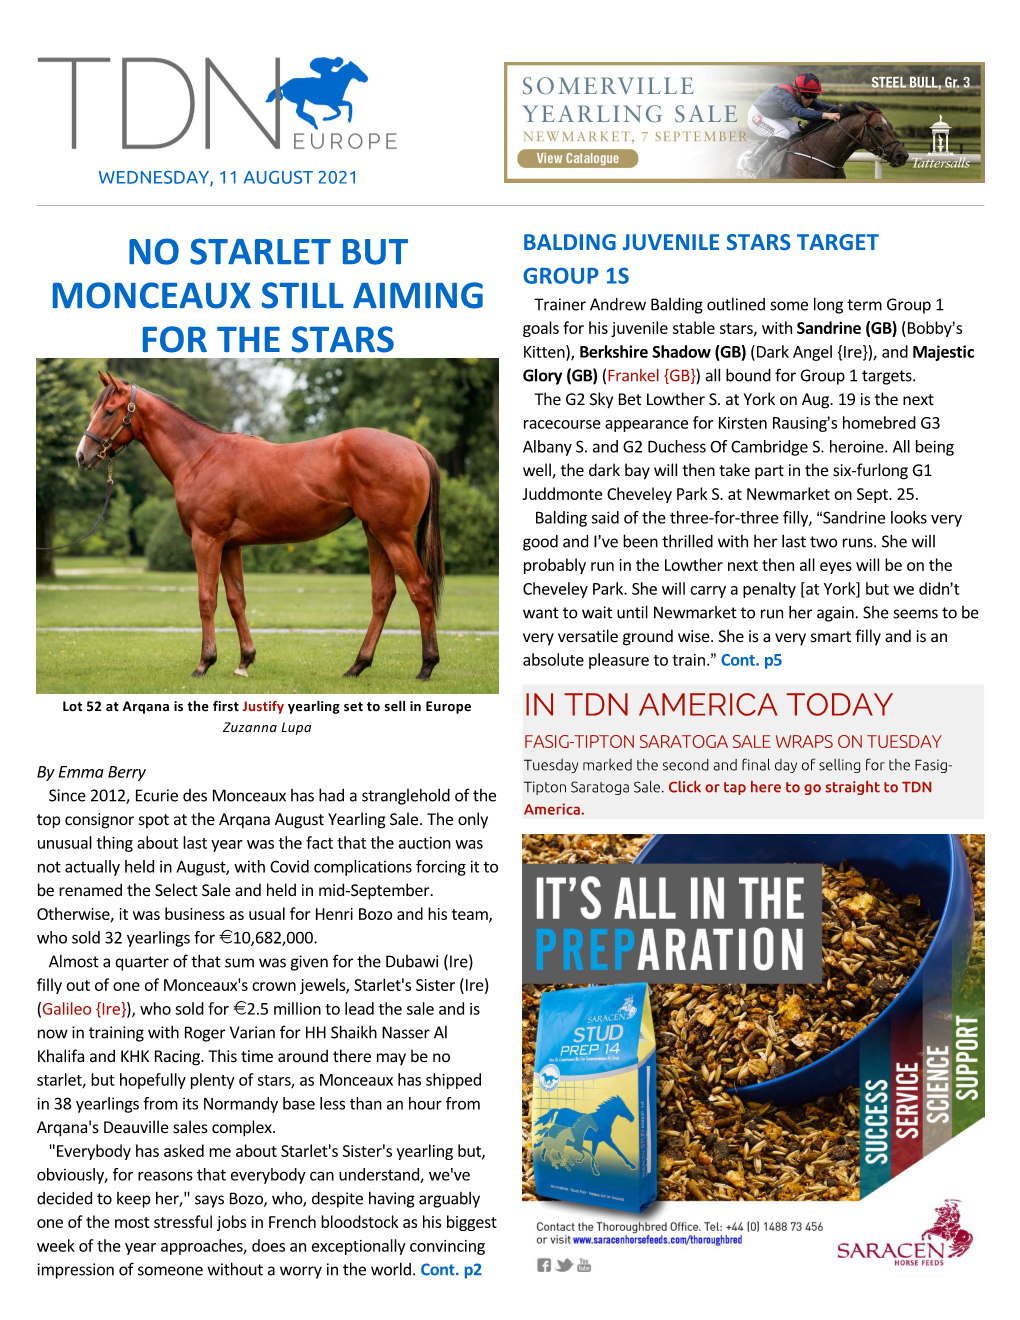 Tdn Europe • Page 2 of 11 • Thetdn.Com Wednesday • 11 August 2021